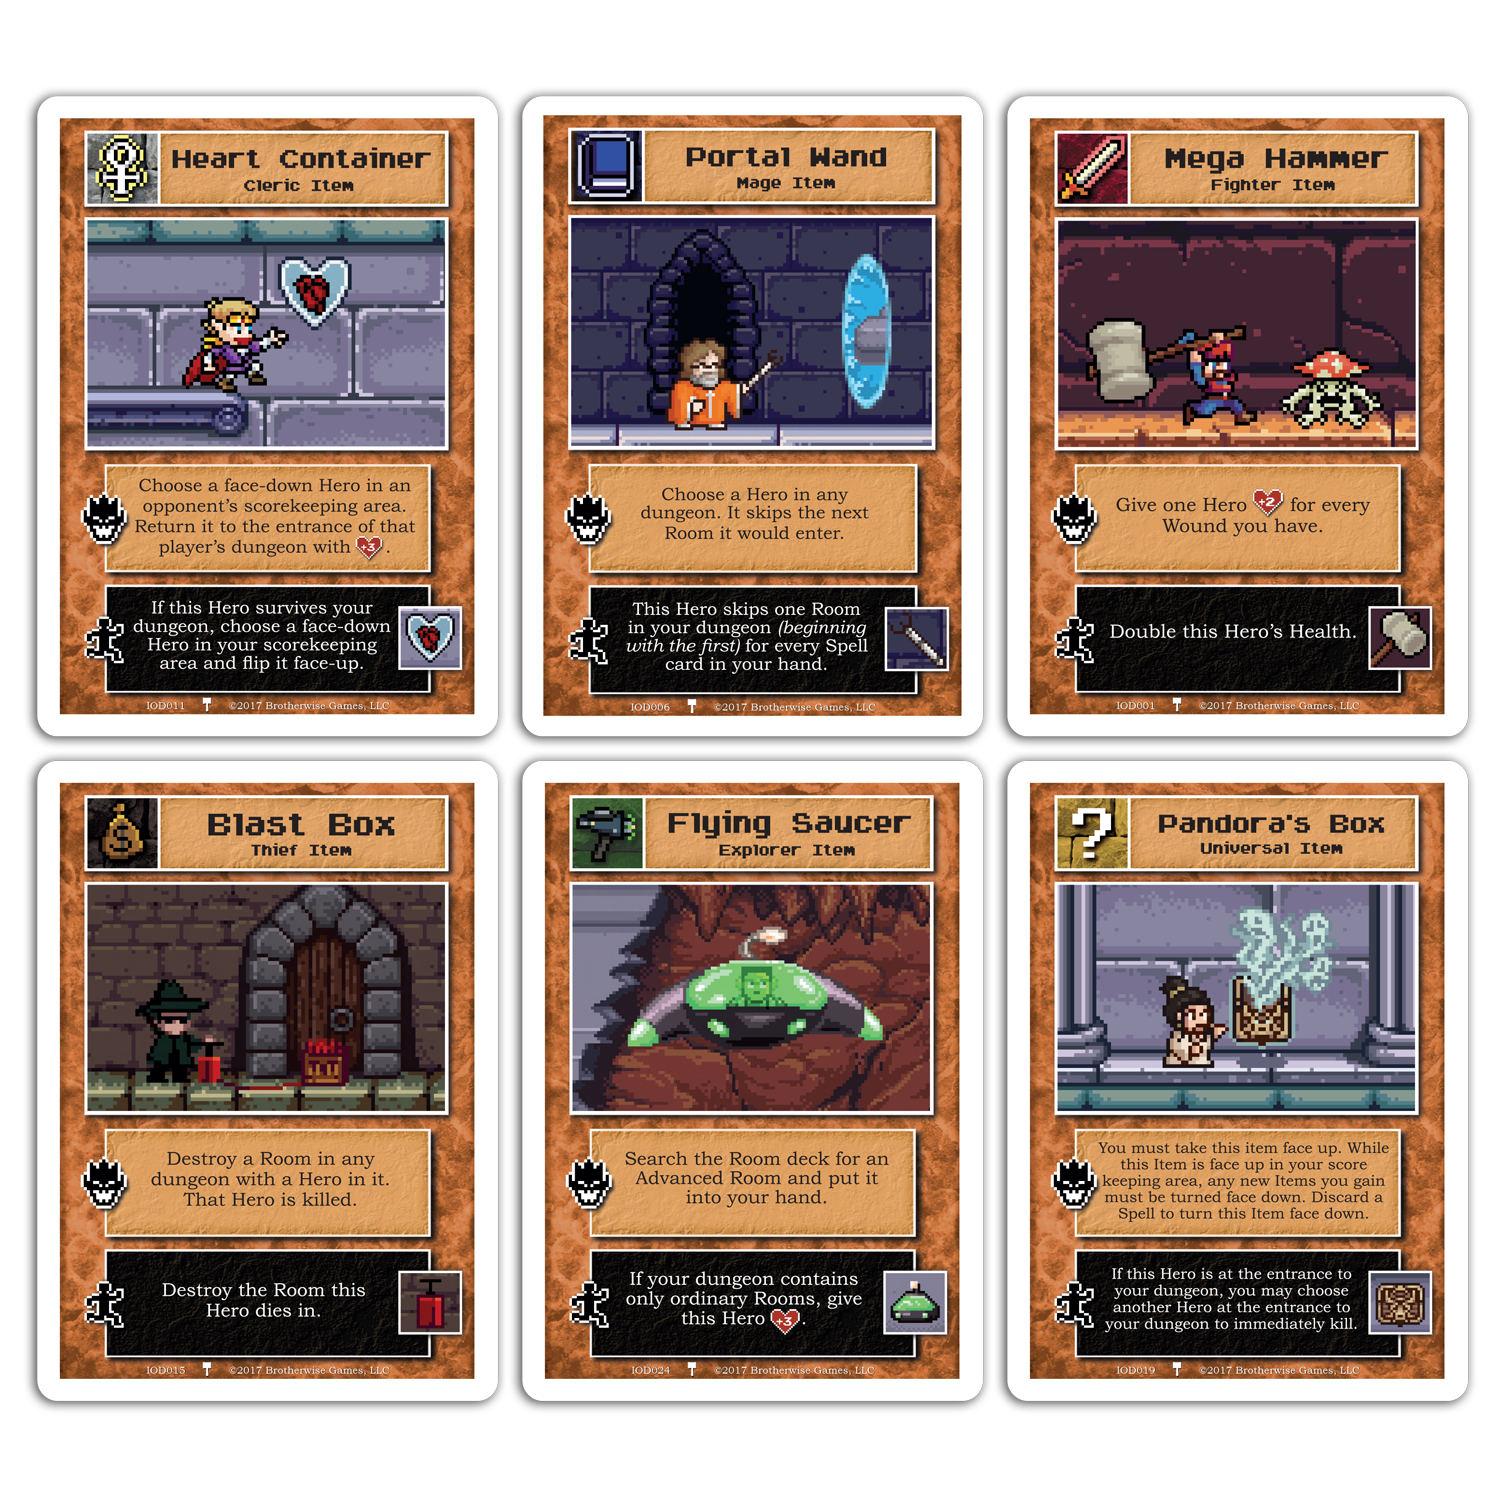 Boss Monster: Implements of Destruction Mini-Expansion - Bards & Cards